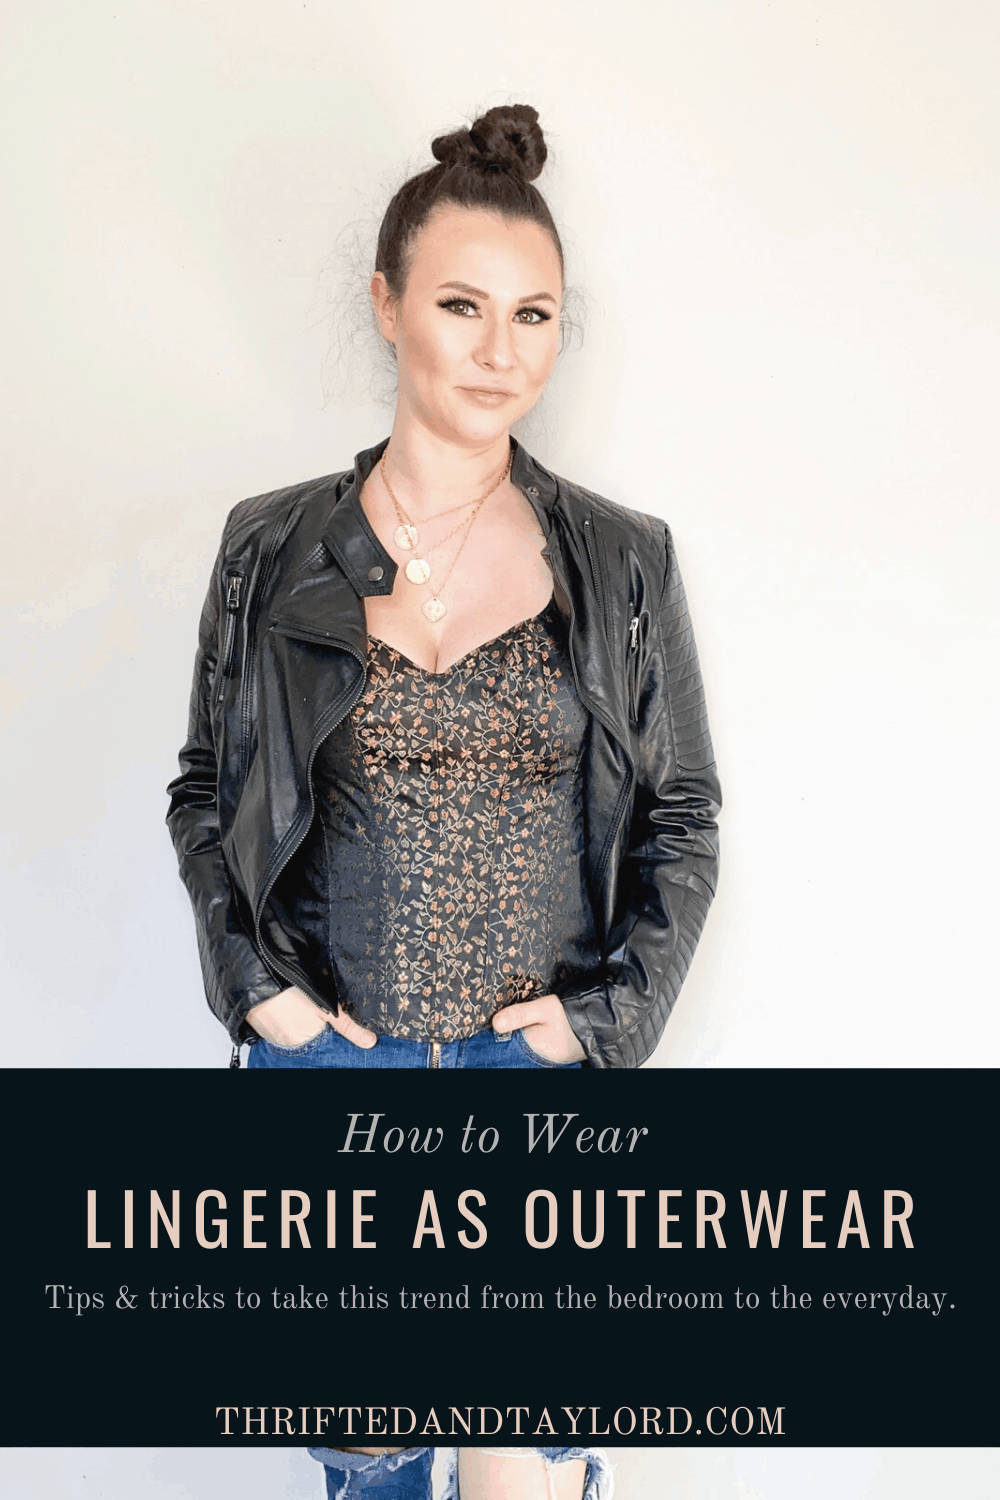 How to Wear Lingerie As Outerwear | A Spring 2020 Trend